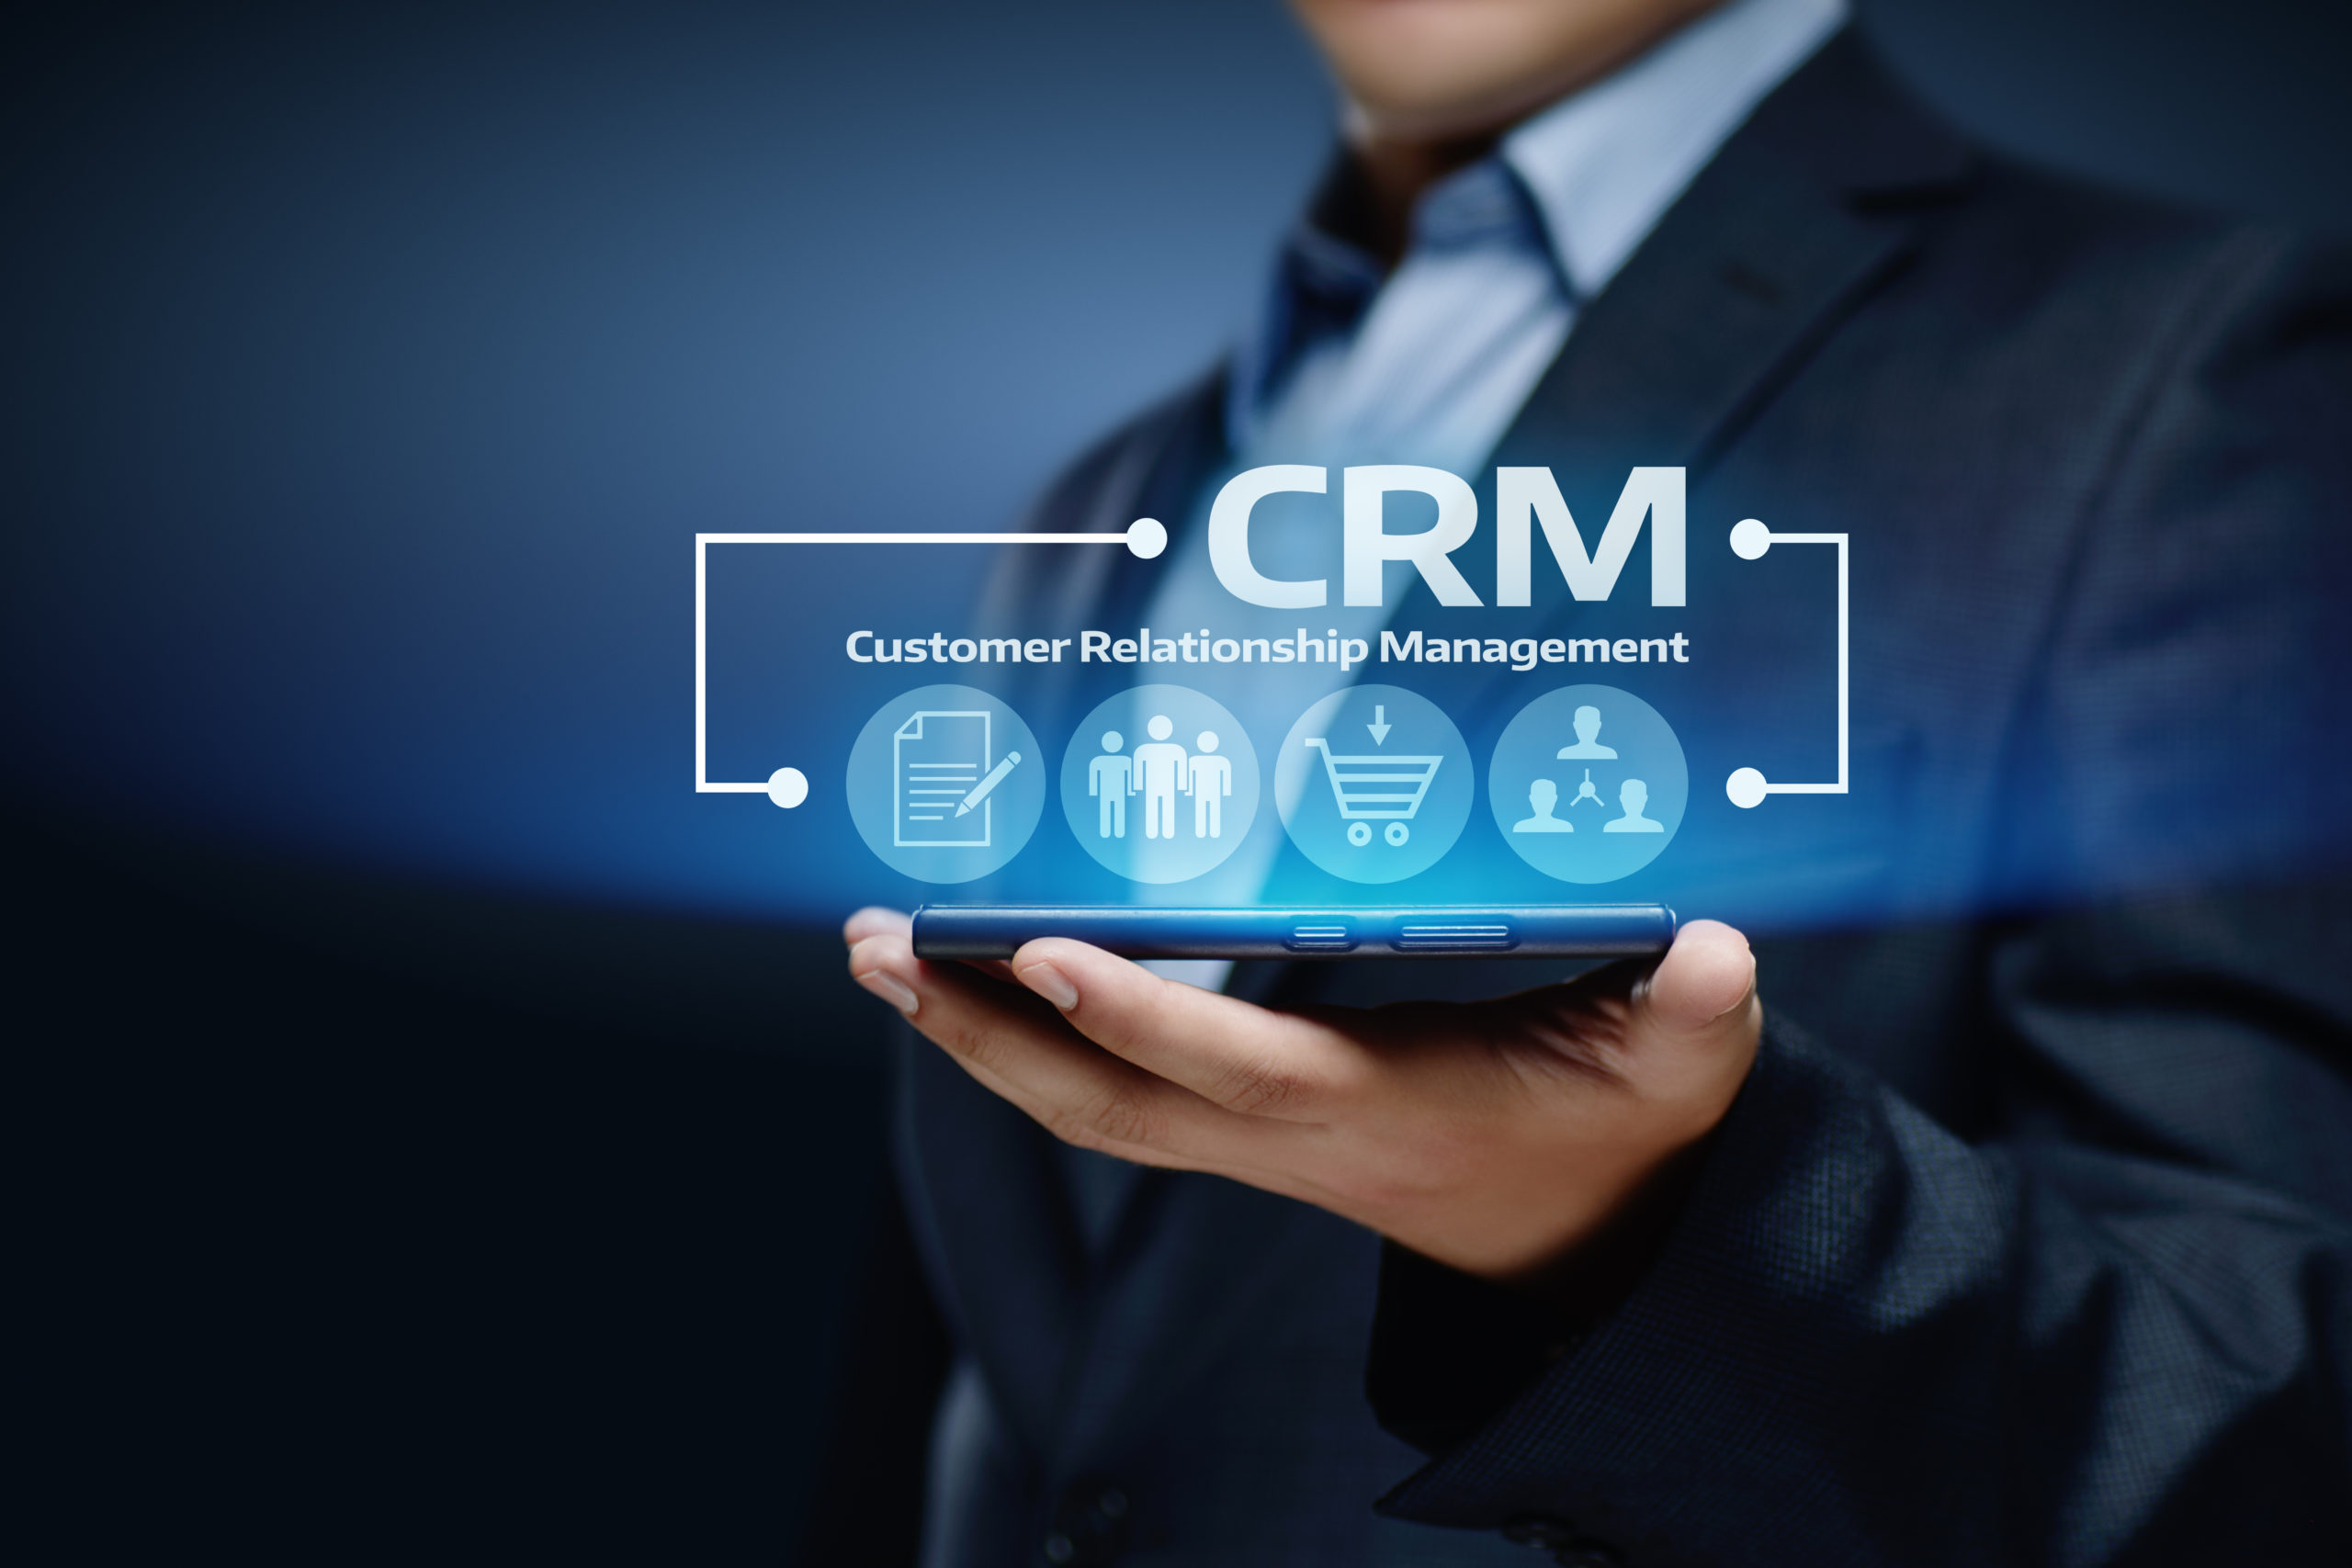 10 Things You Need to Consider When Choosing a CRM